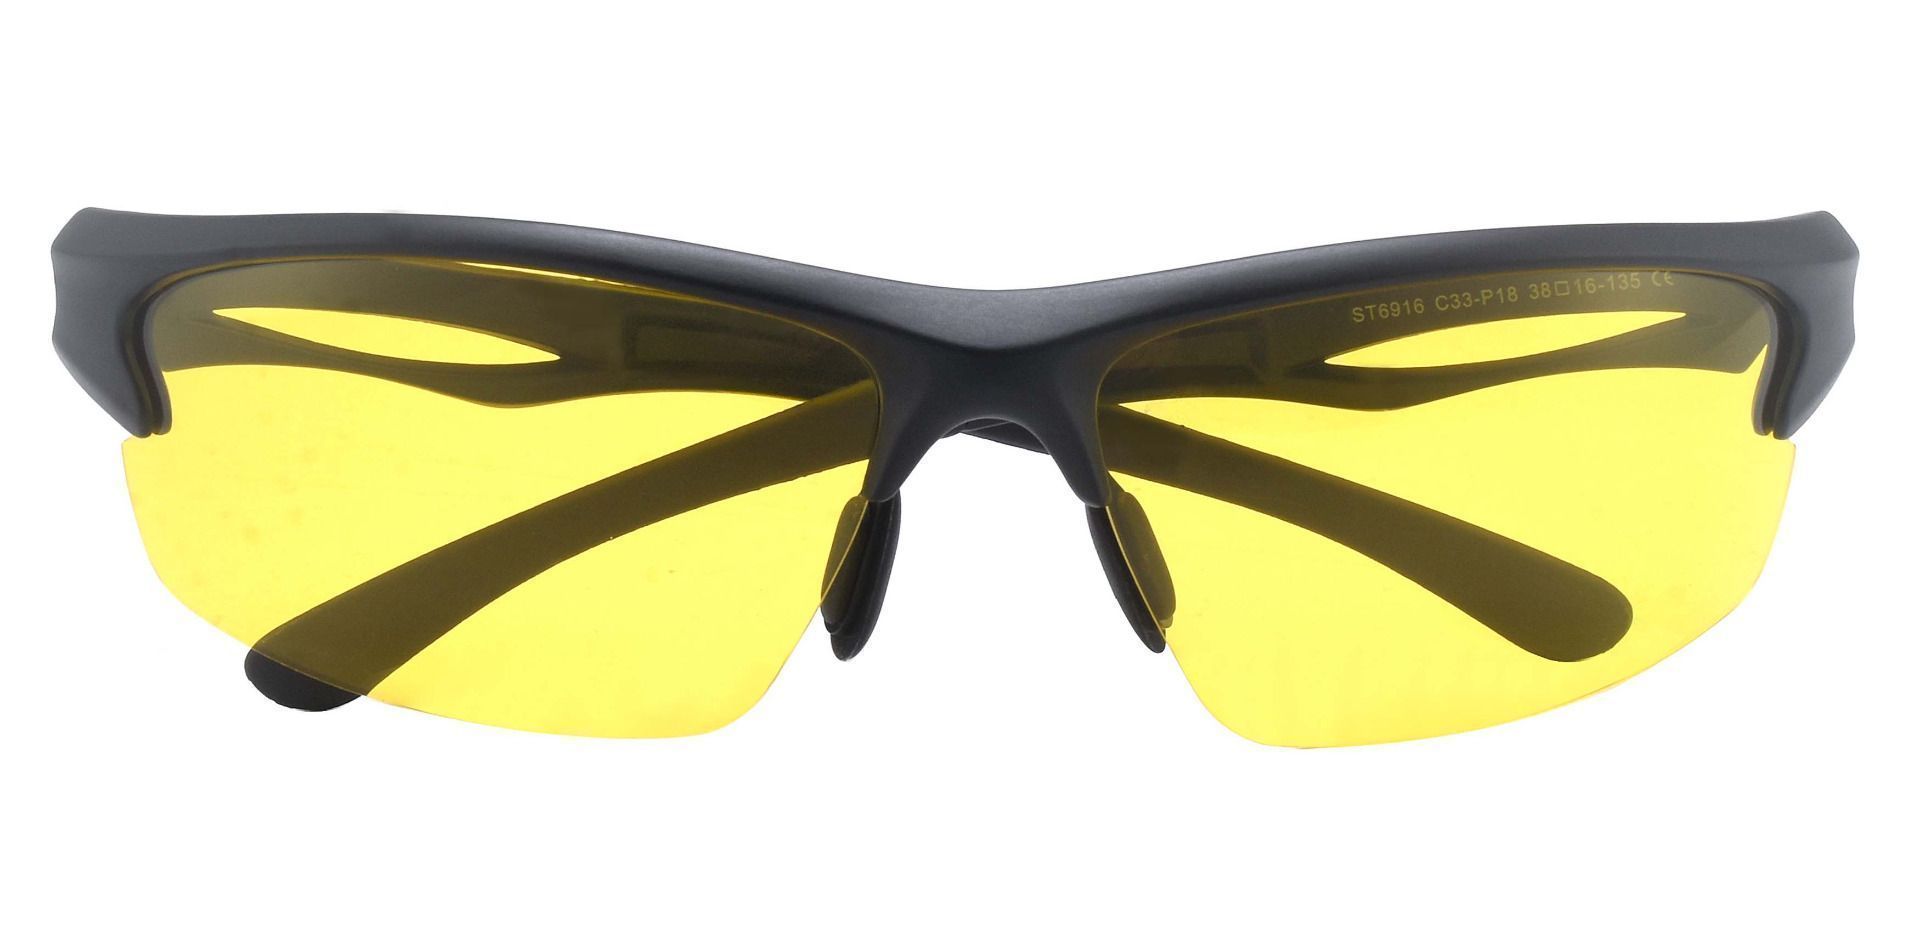 League Sports Glasses Non-Rx Sunglasses - Black Frame With Yellow Night Lenses